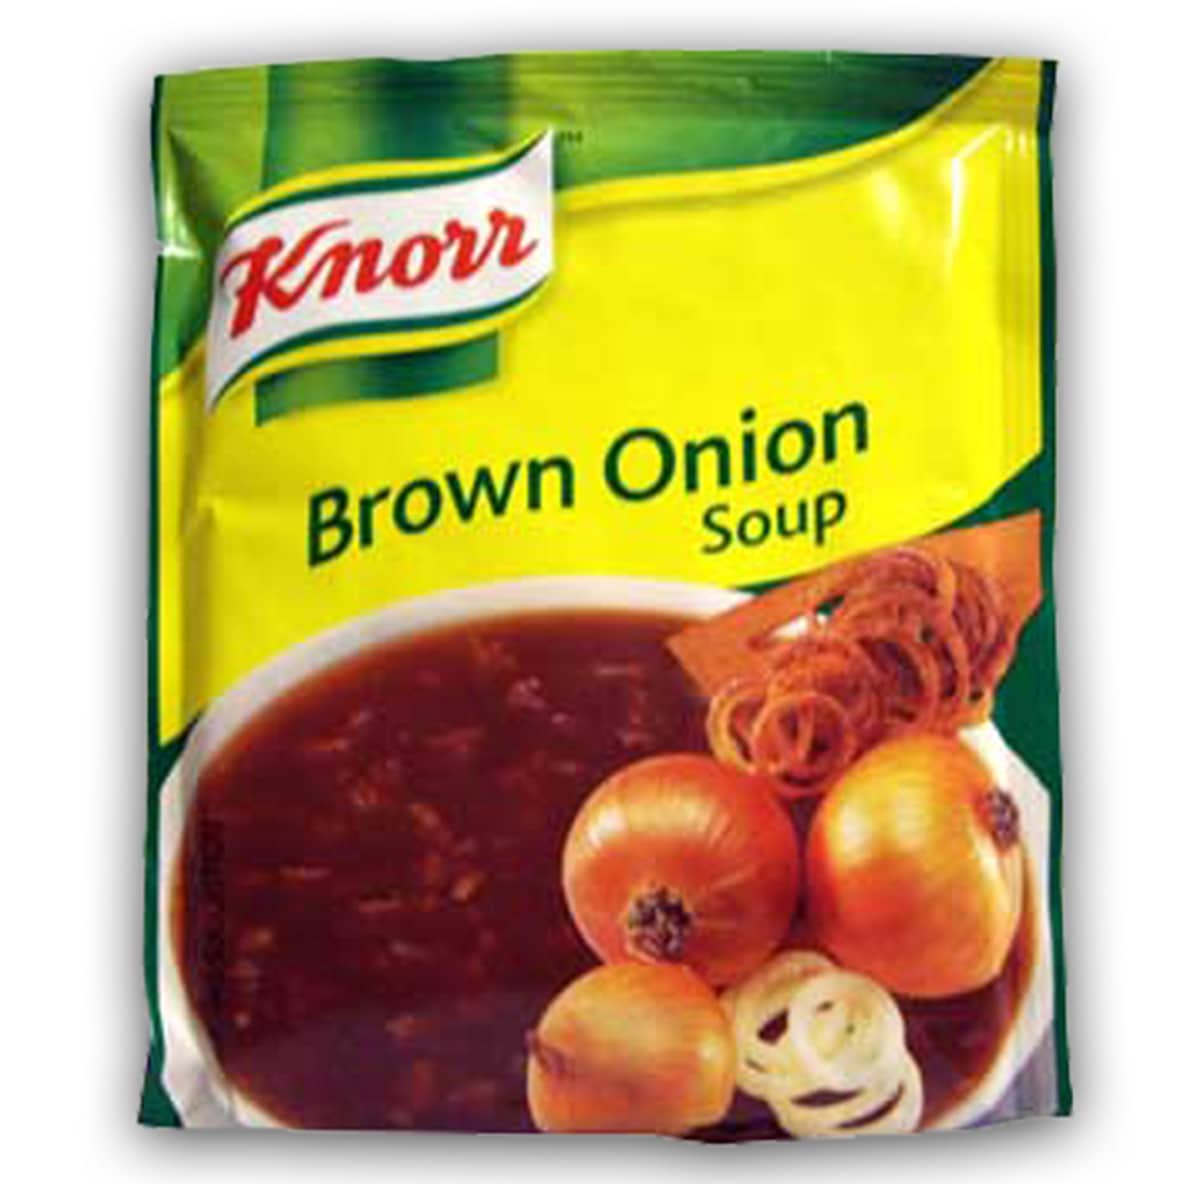 Buy Knorr Brown Onion Soup - 45 gm